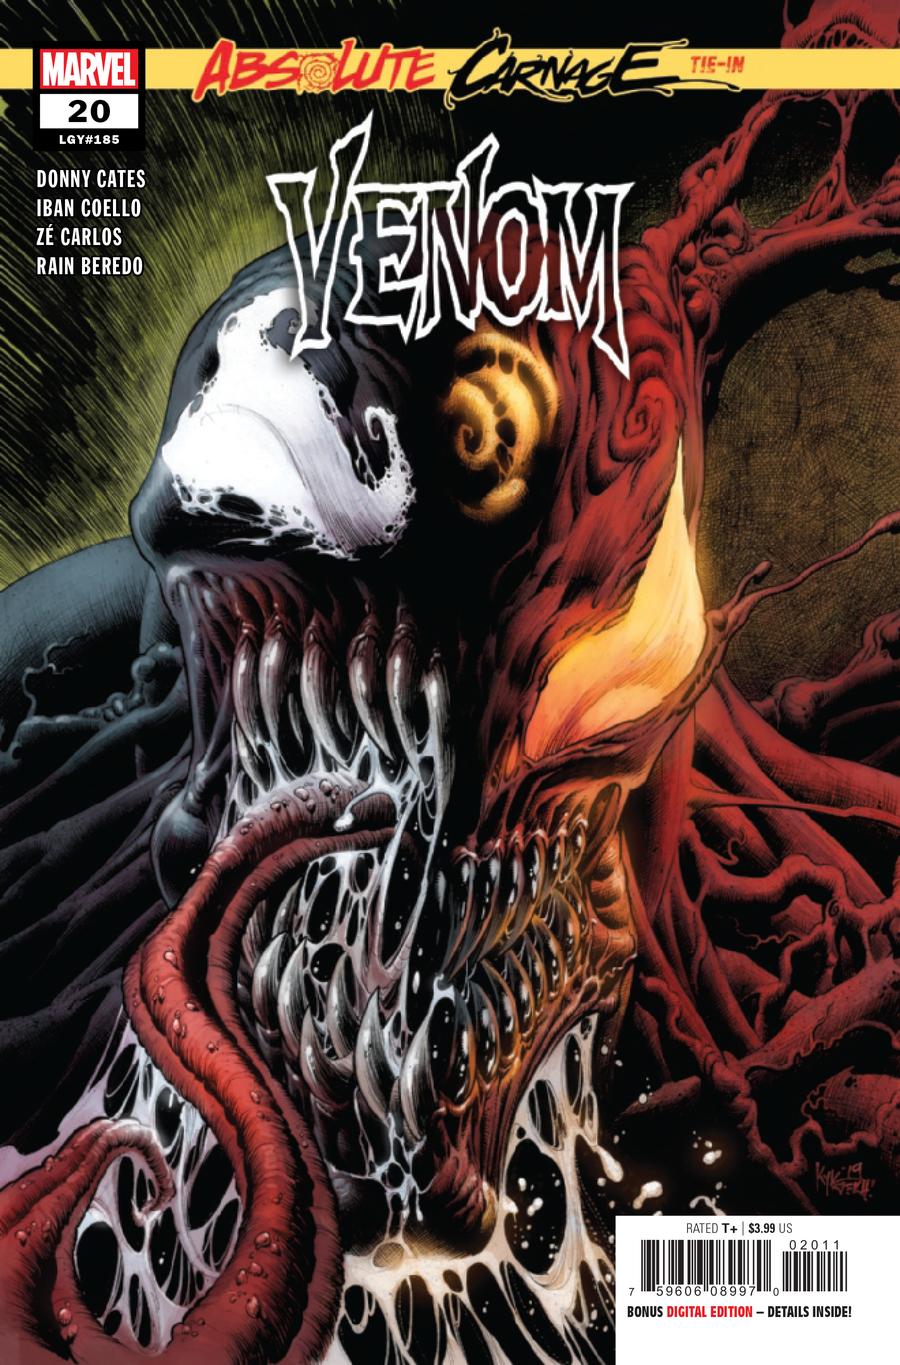 Venom Vol 4 #20 Cover A Regular Kyle Hotz Cover (Absolute Carnage Tie-In)